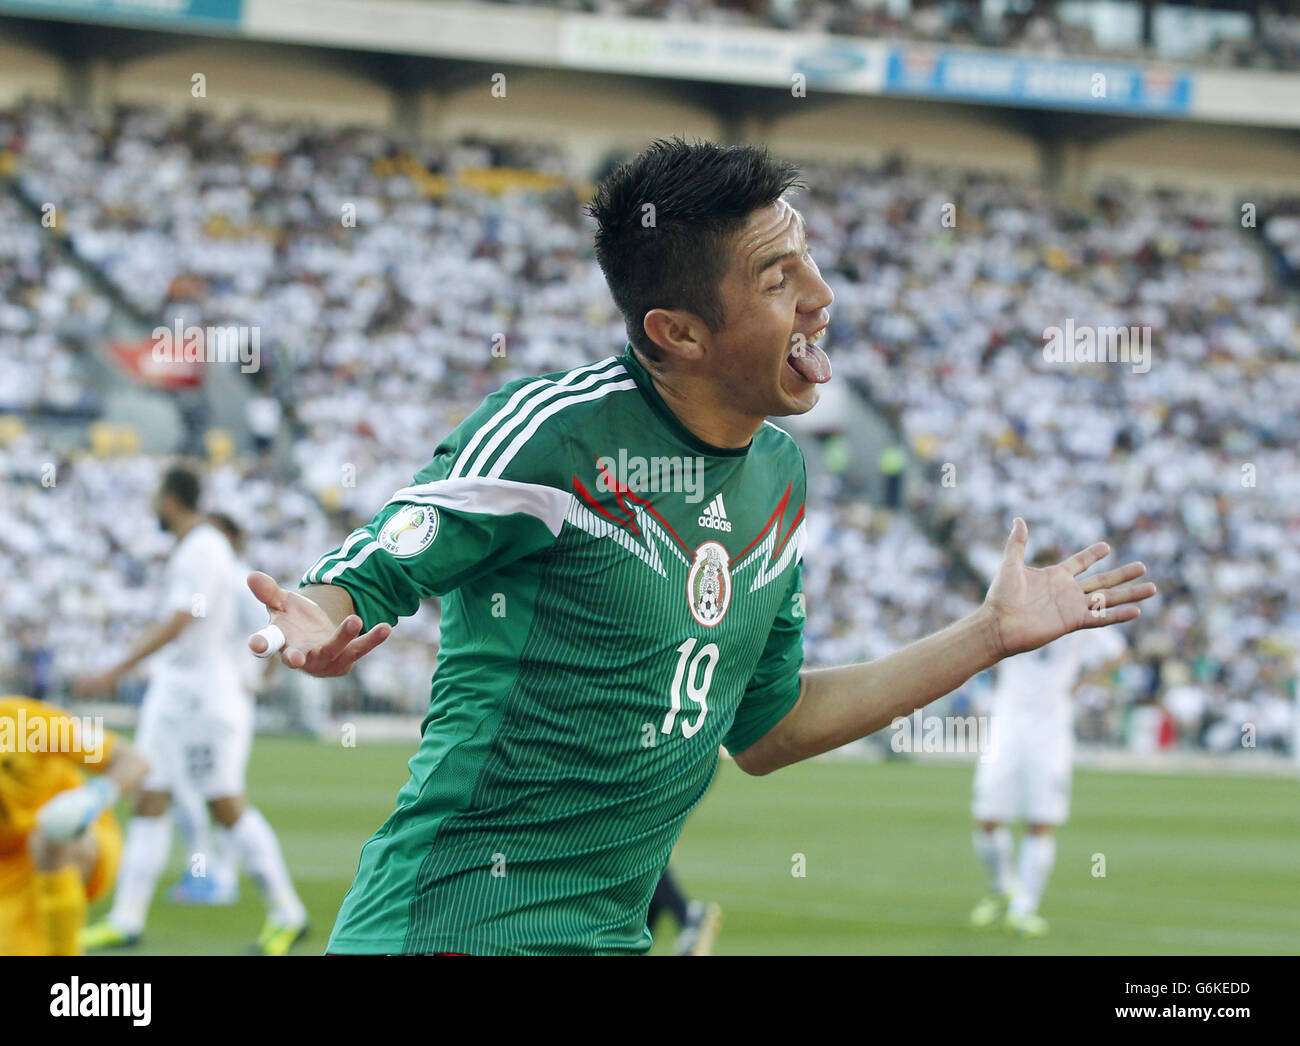 Soccer - FIFA World Cup Qualifying - Play off - Second Leg - New Zealand v Mexico - Westpac Stadium. Mexico's Oribe Peralta Stock Photo